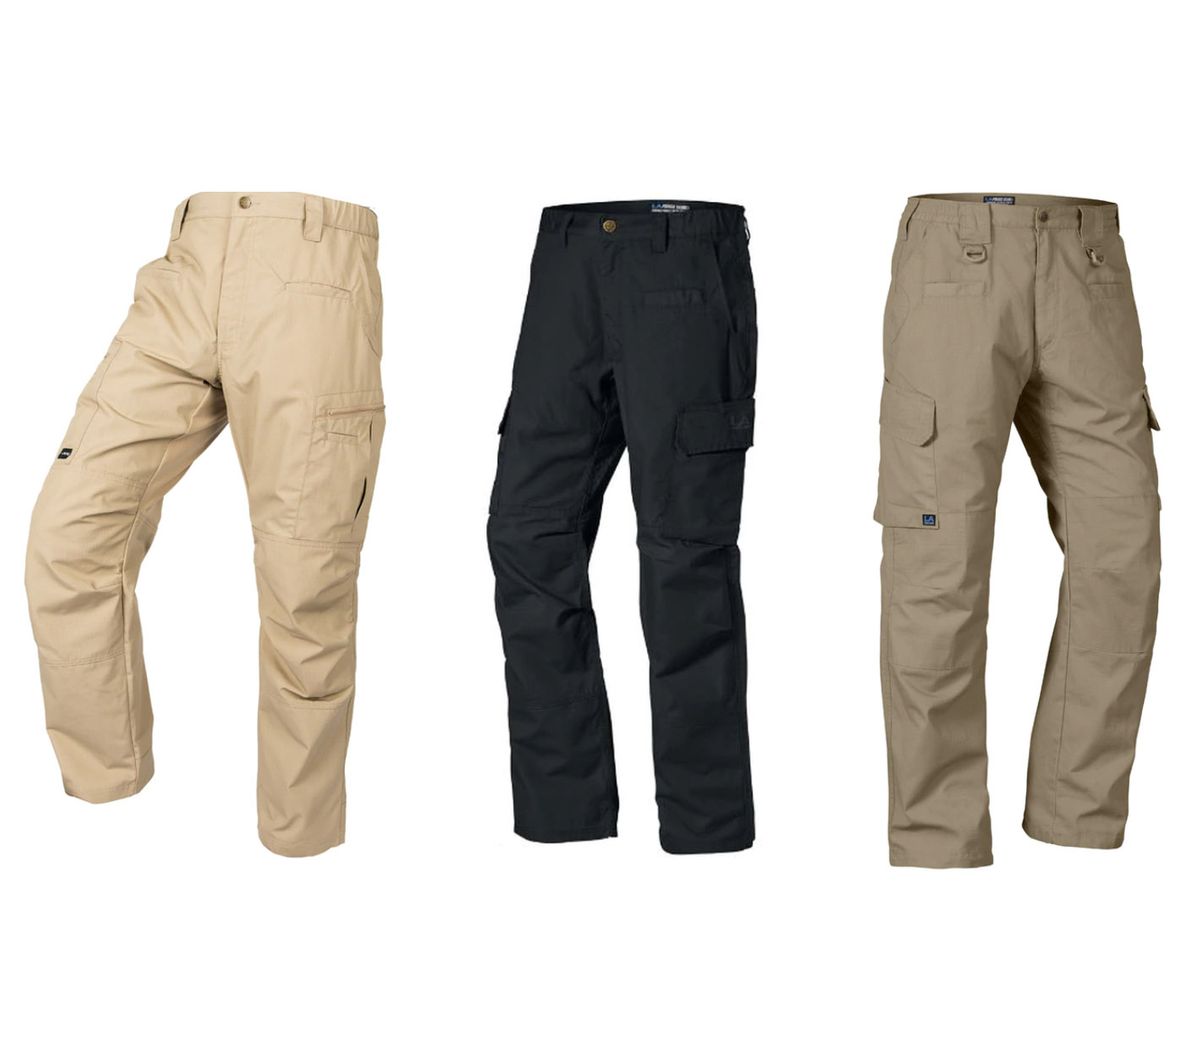 Tactical Pants | Tactical Cargo Pants For Civil, Police and Hiking | M-TAC